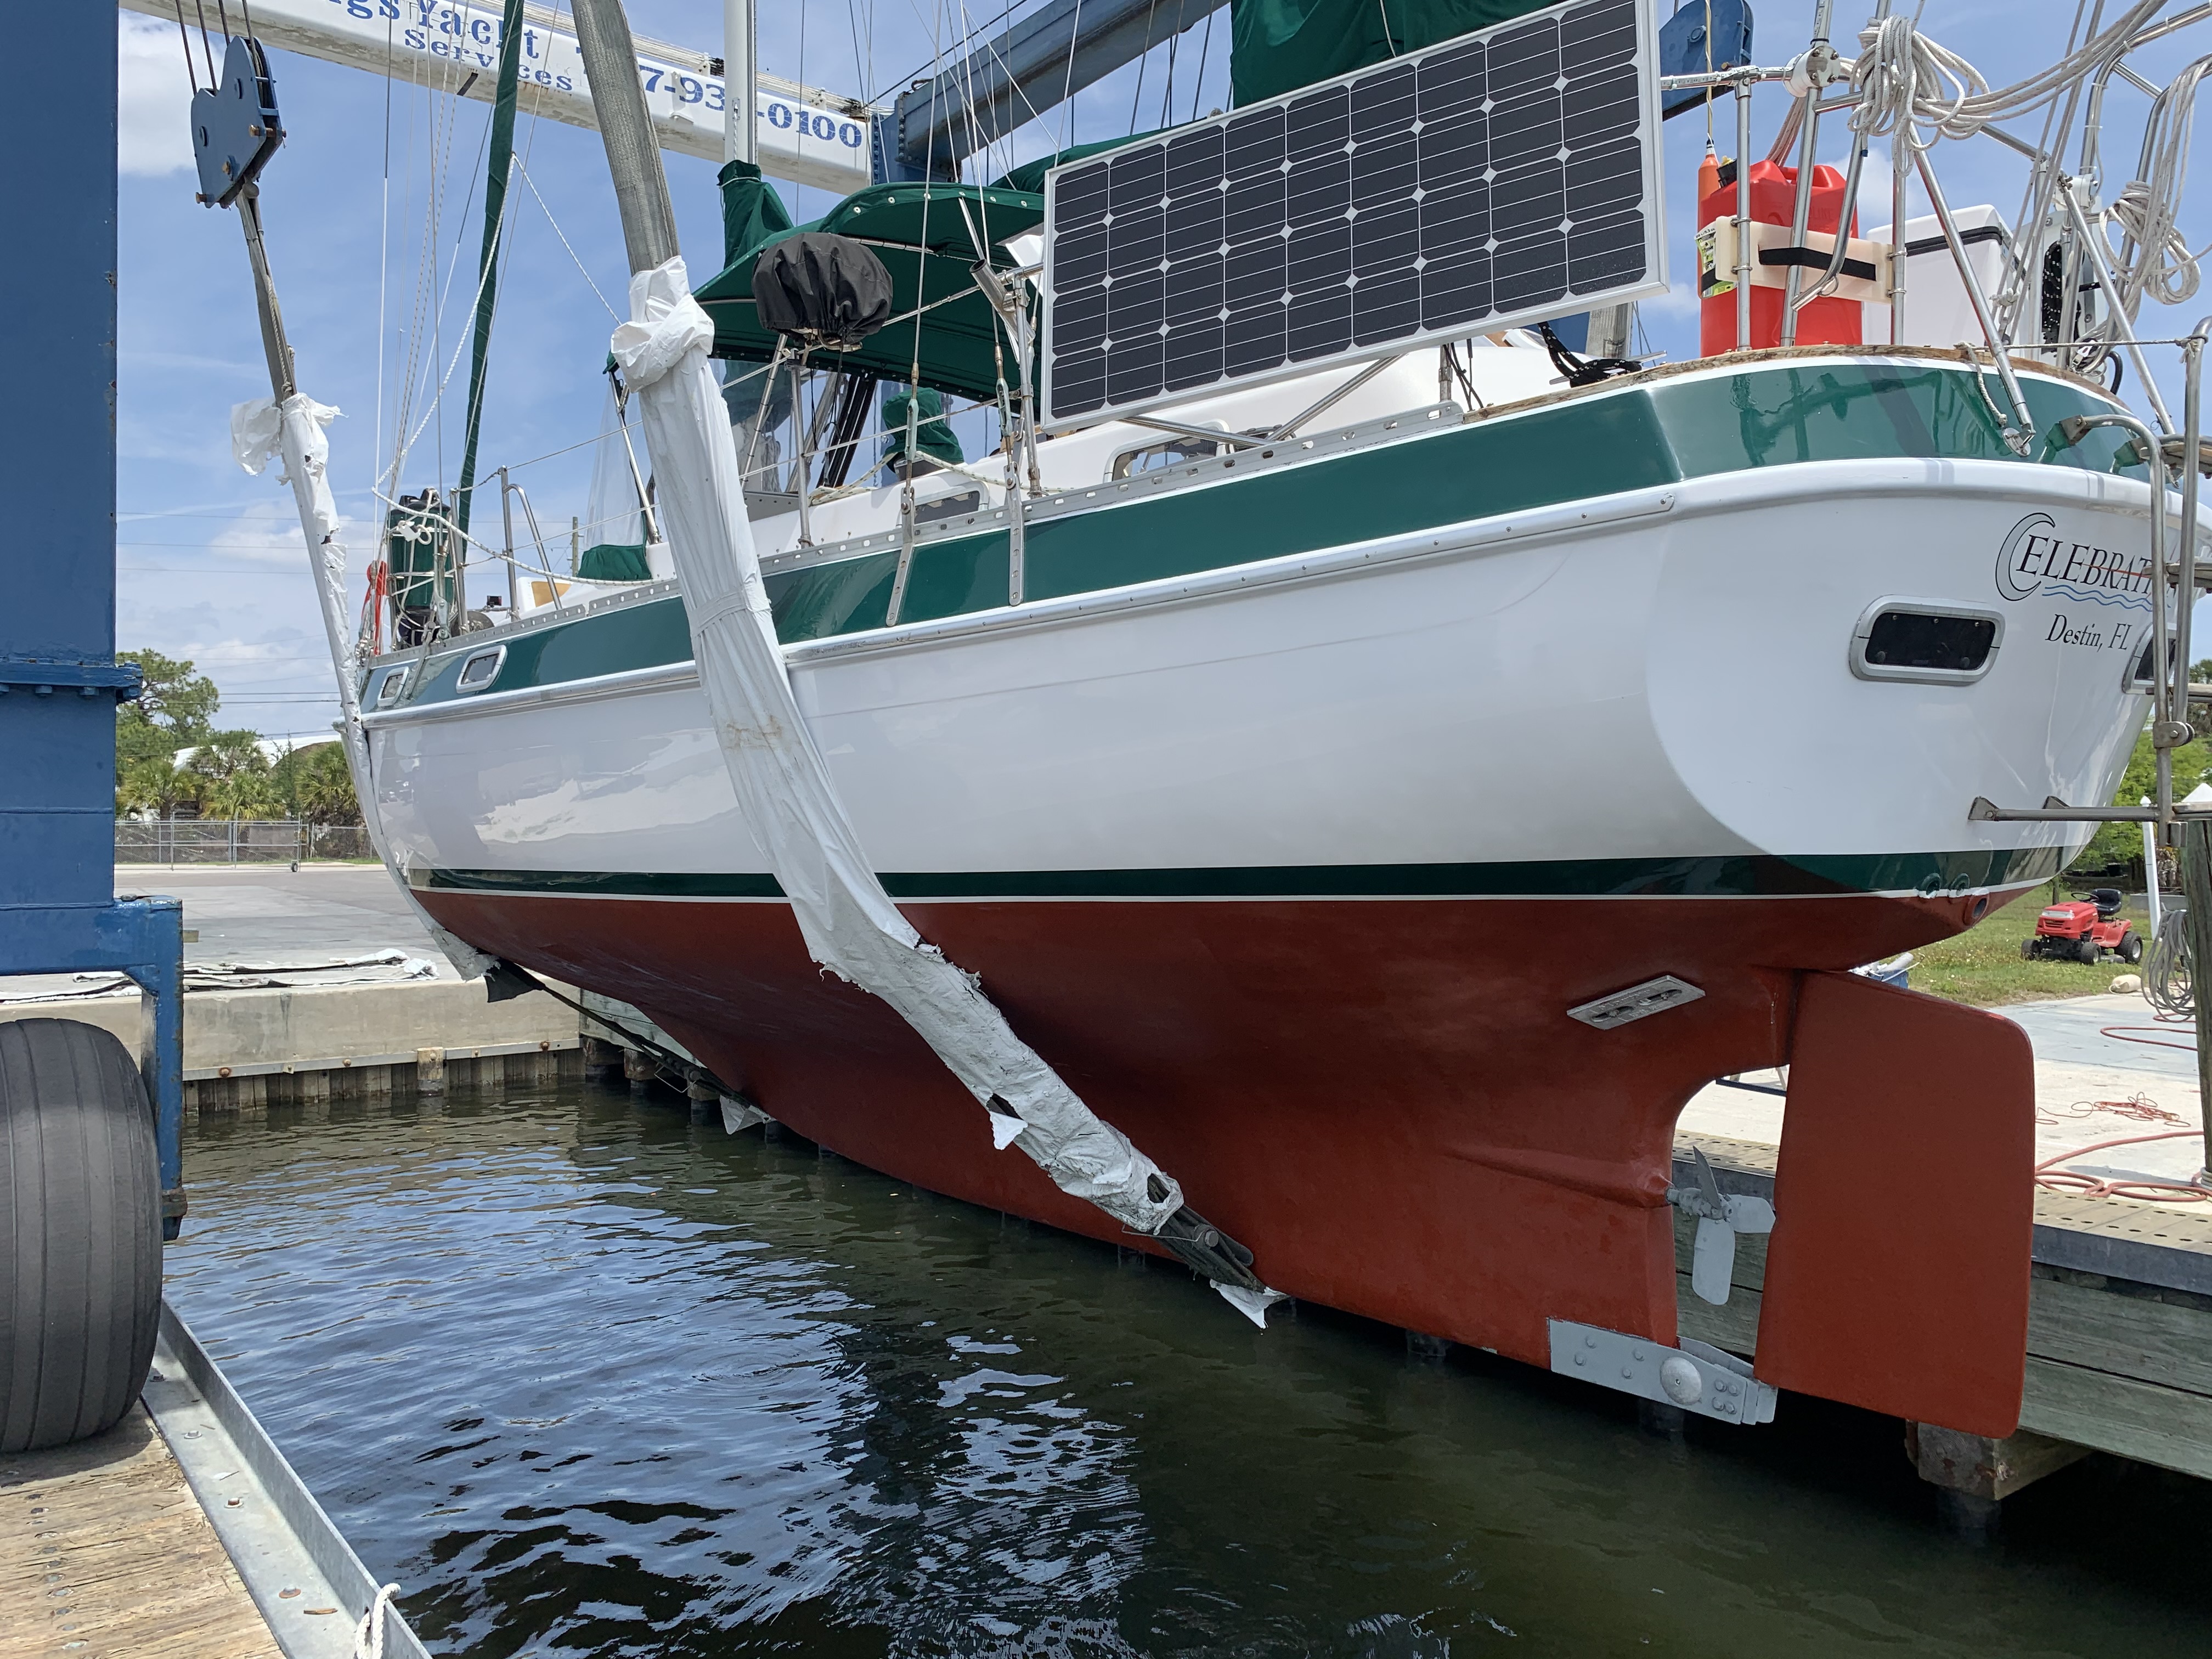 1979 Morgan 415 Out Island Ketch Sailboat for sale in St Petersburg, FL - image 30 